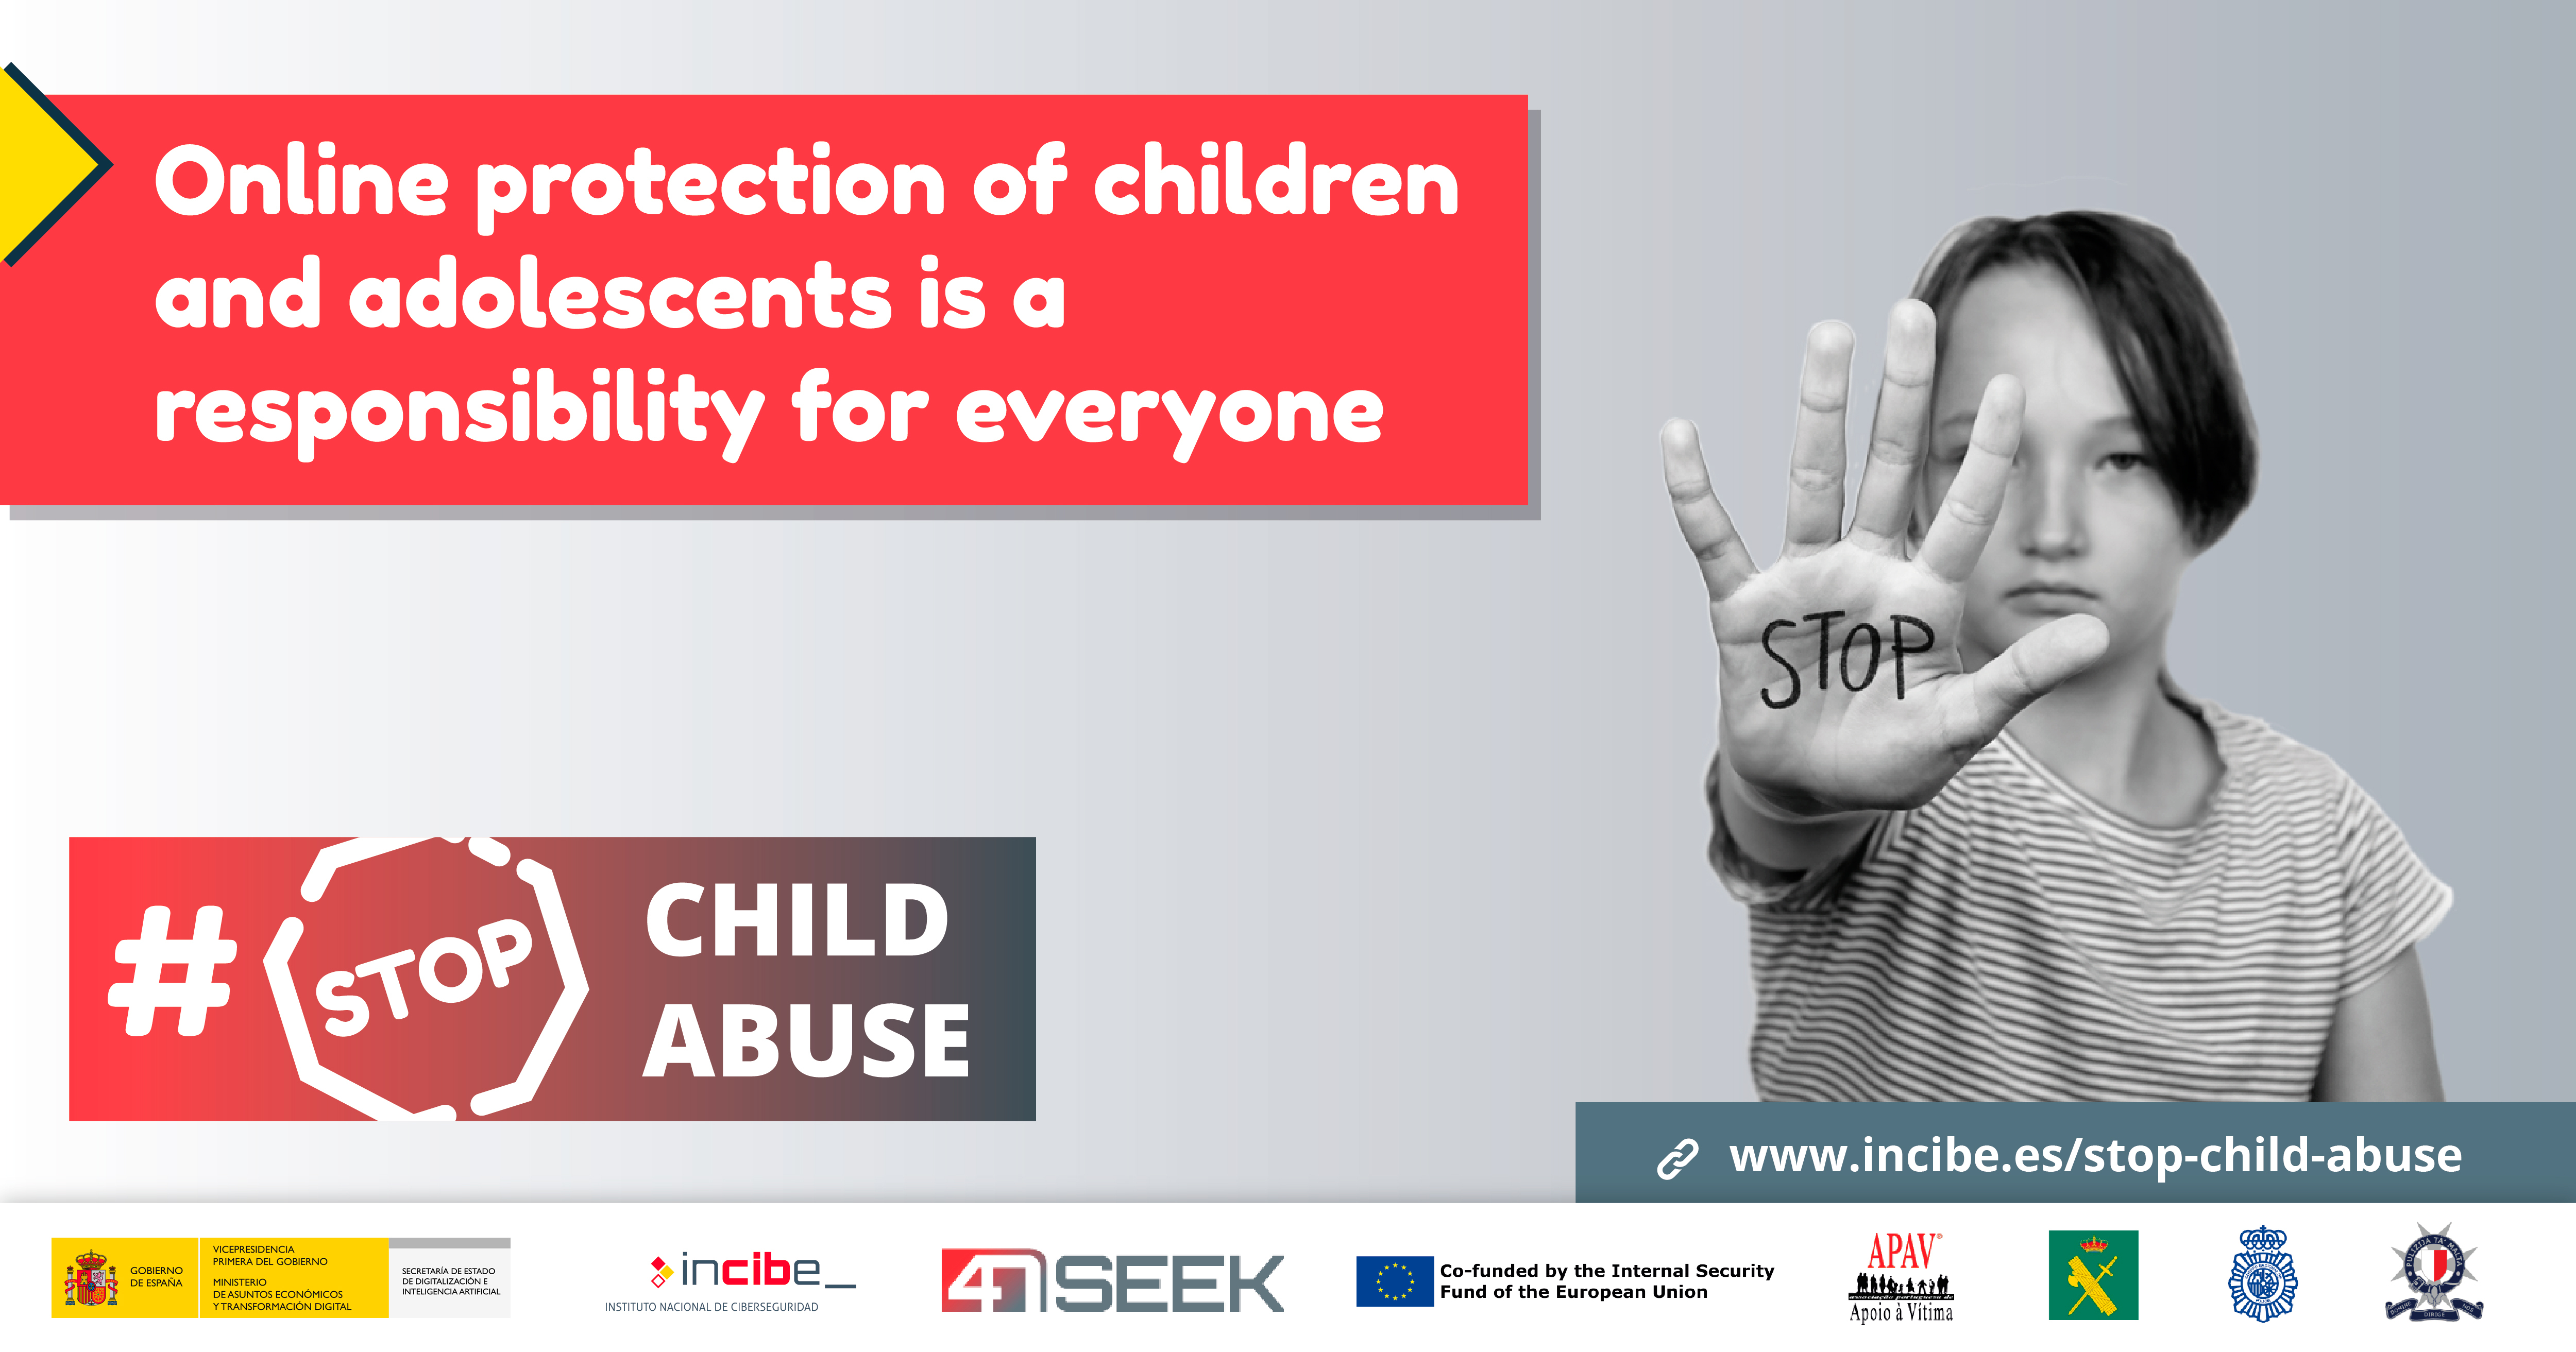 Online protection of children and adolescents is a responsibility for everyone #StopChildAbuse